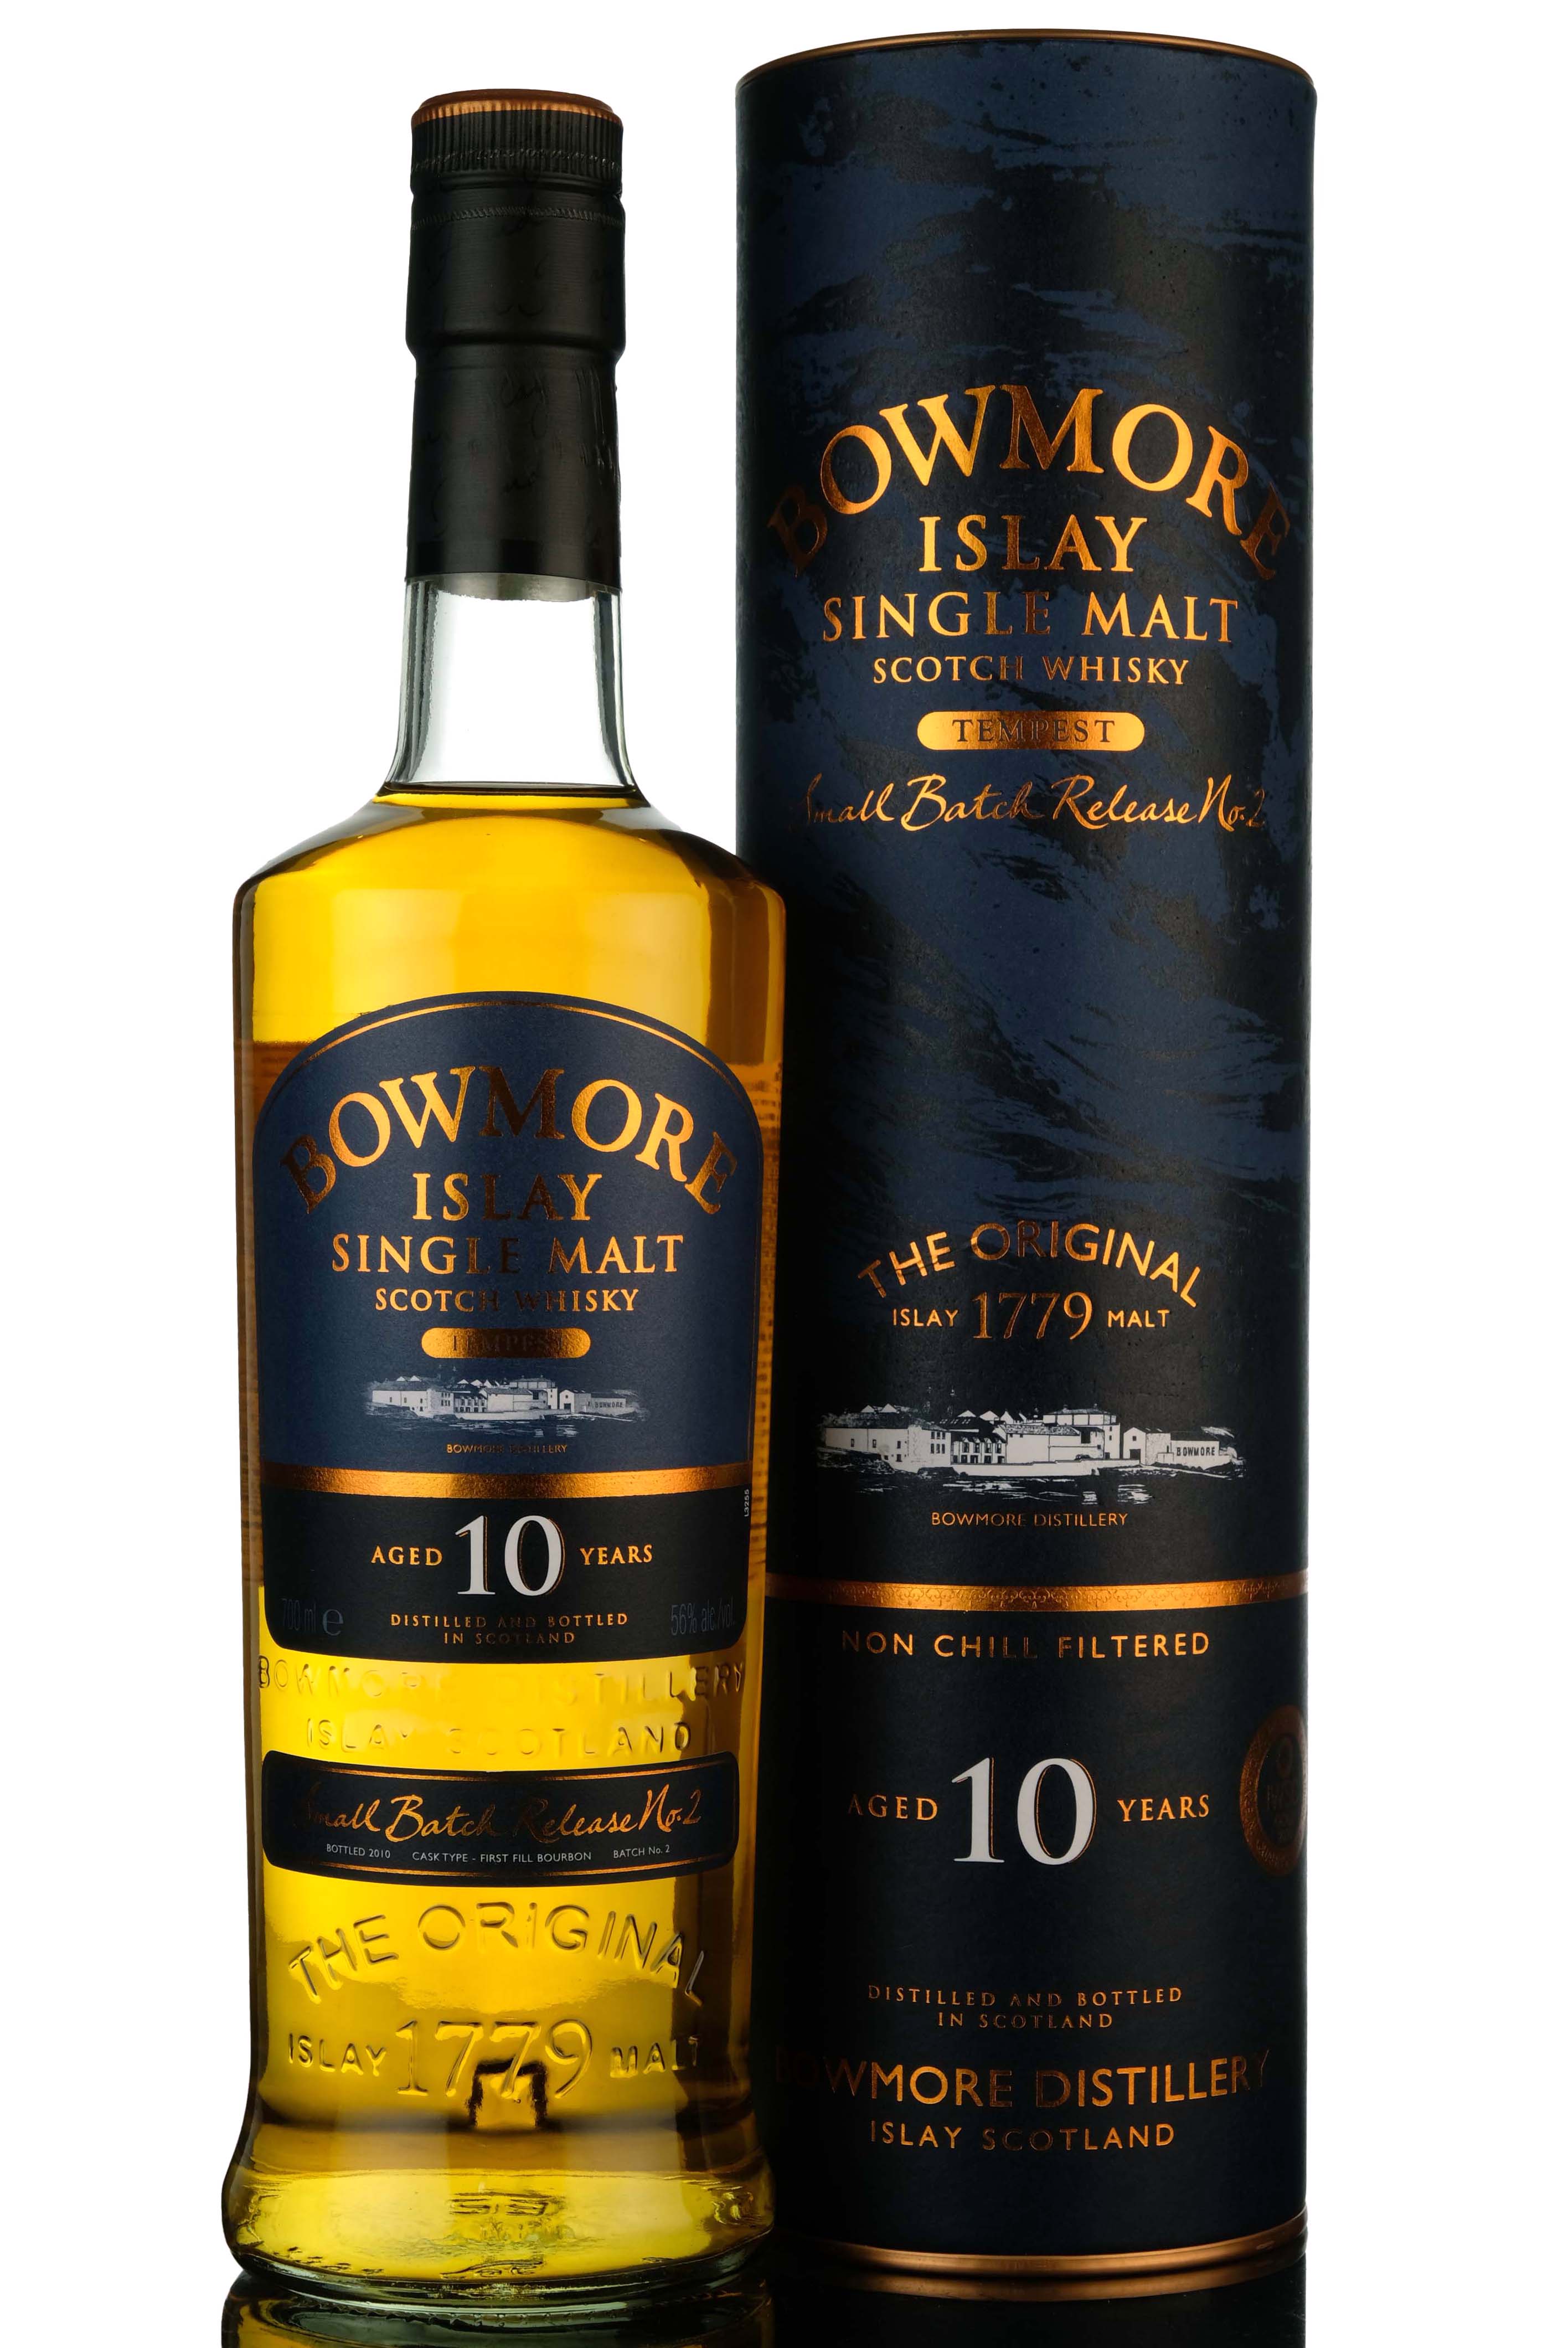 Bowmore 10 Year Old - Tempest - Batch 2 - 2010 Release